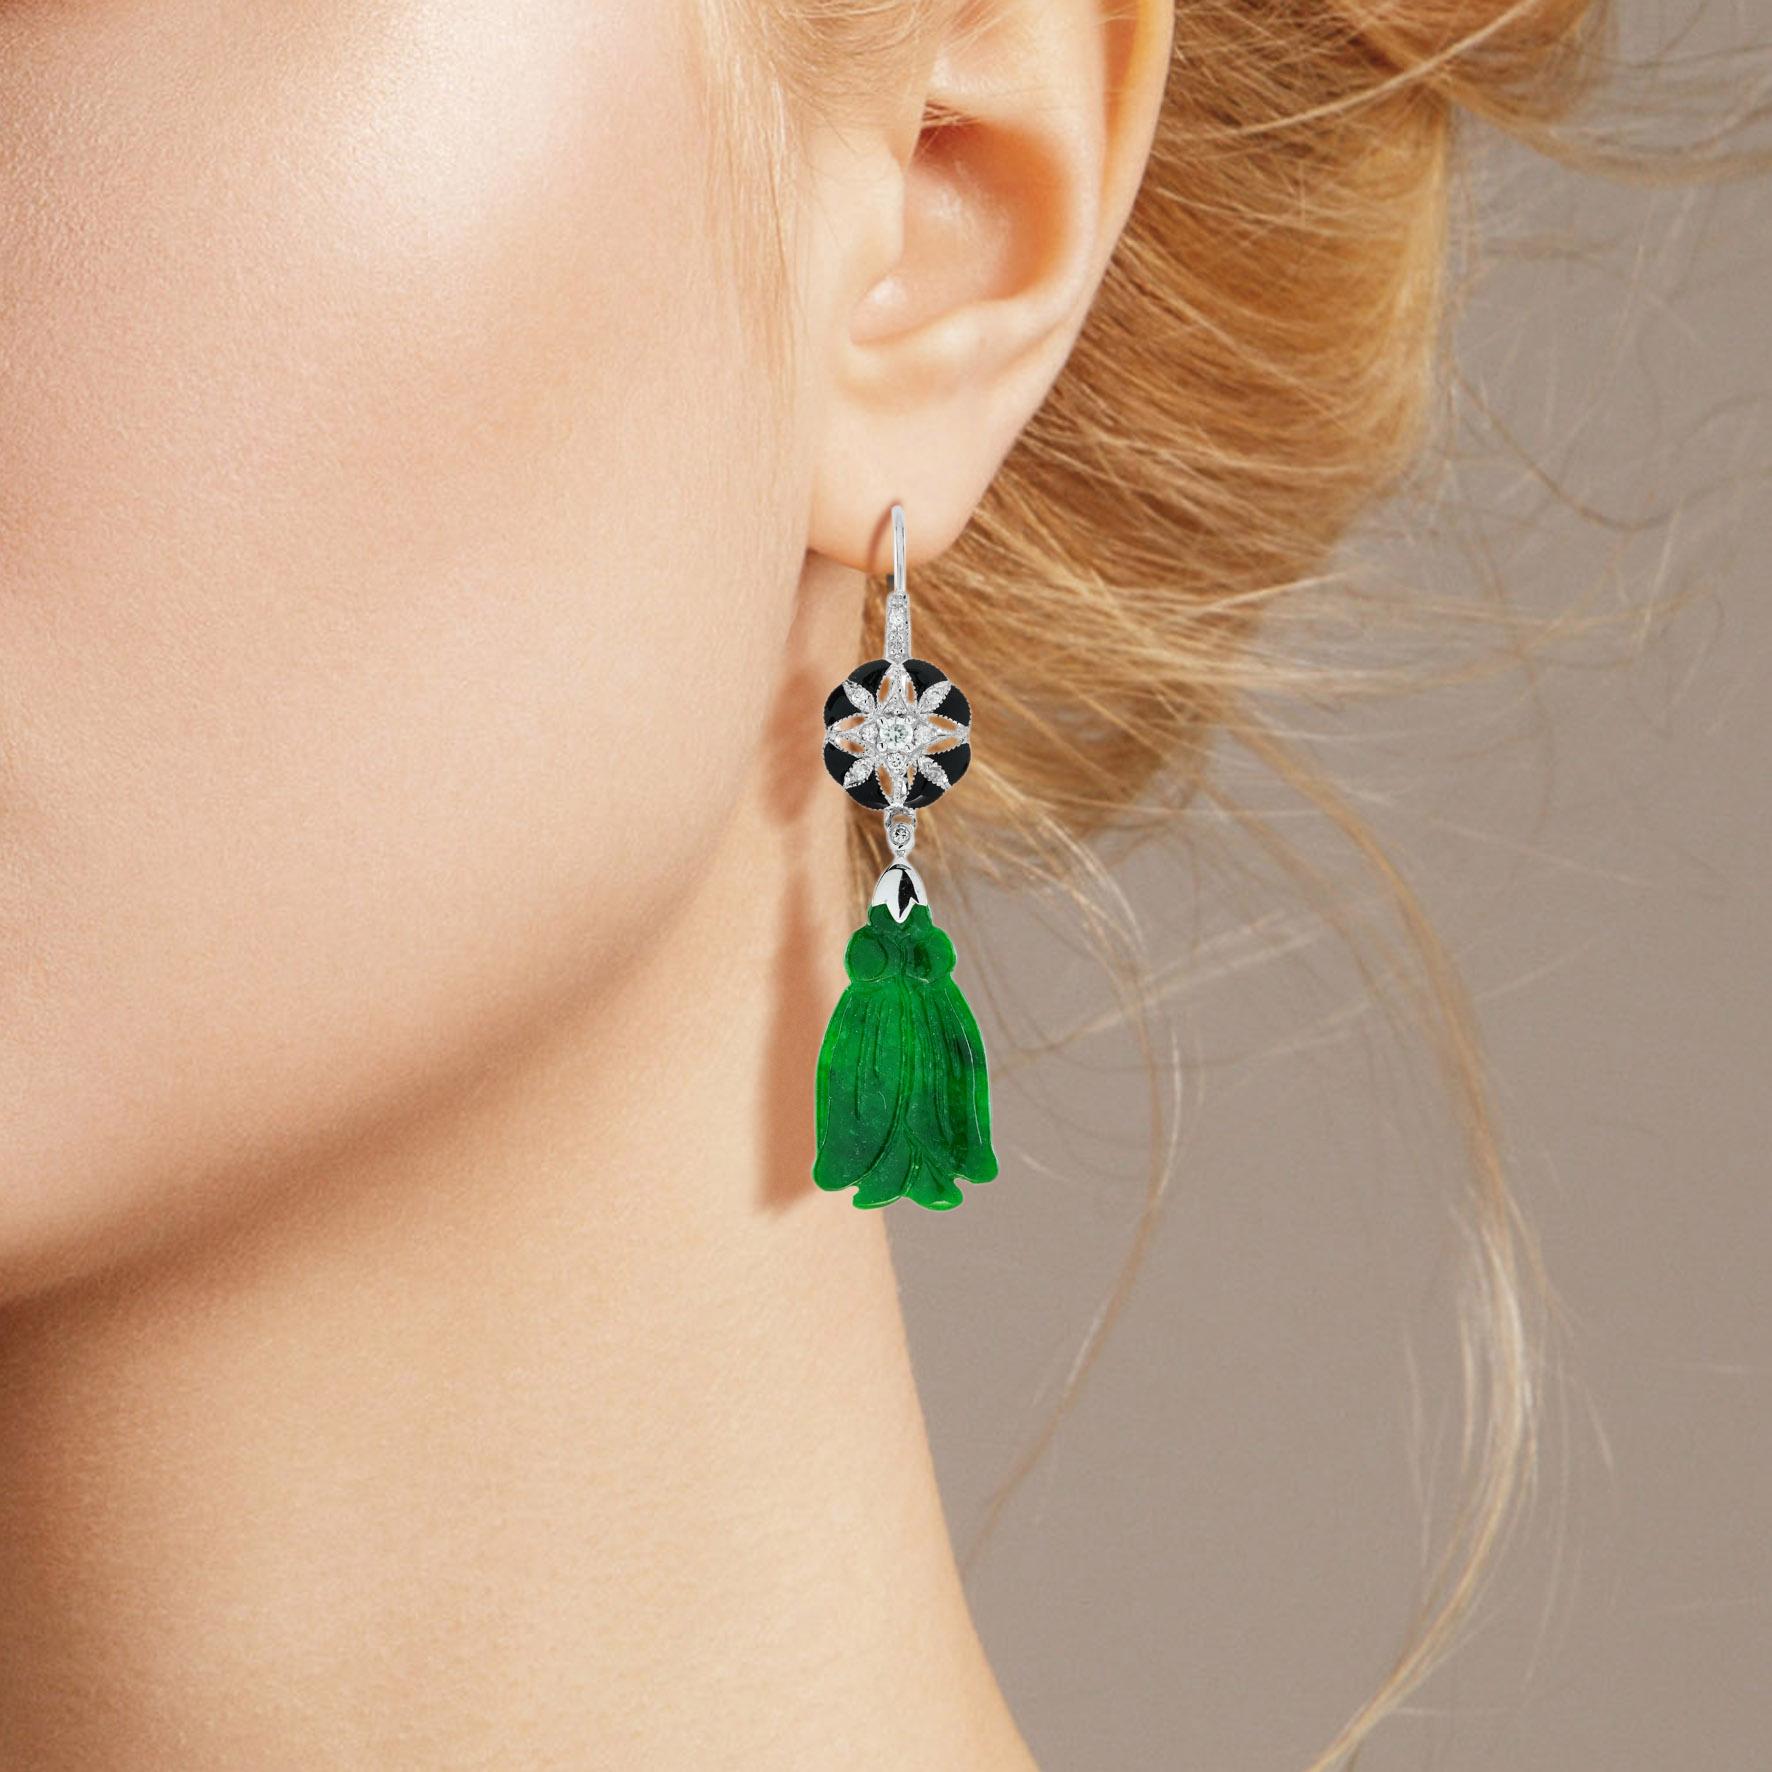 The natural jade in these lovely earrings has some very special shape. Both pieces have a strong green color and well tassel carvings. The jade is suspended in a 9k white gold setting with diamond and enamel floral on the top. The earrings transfer